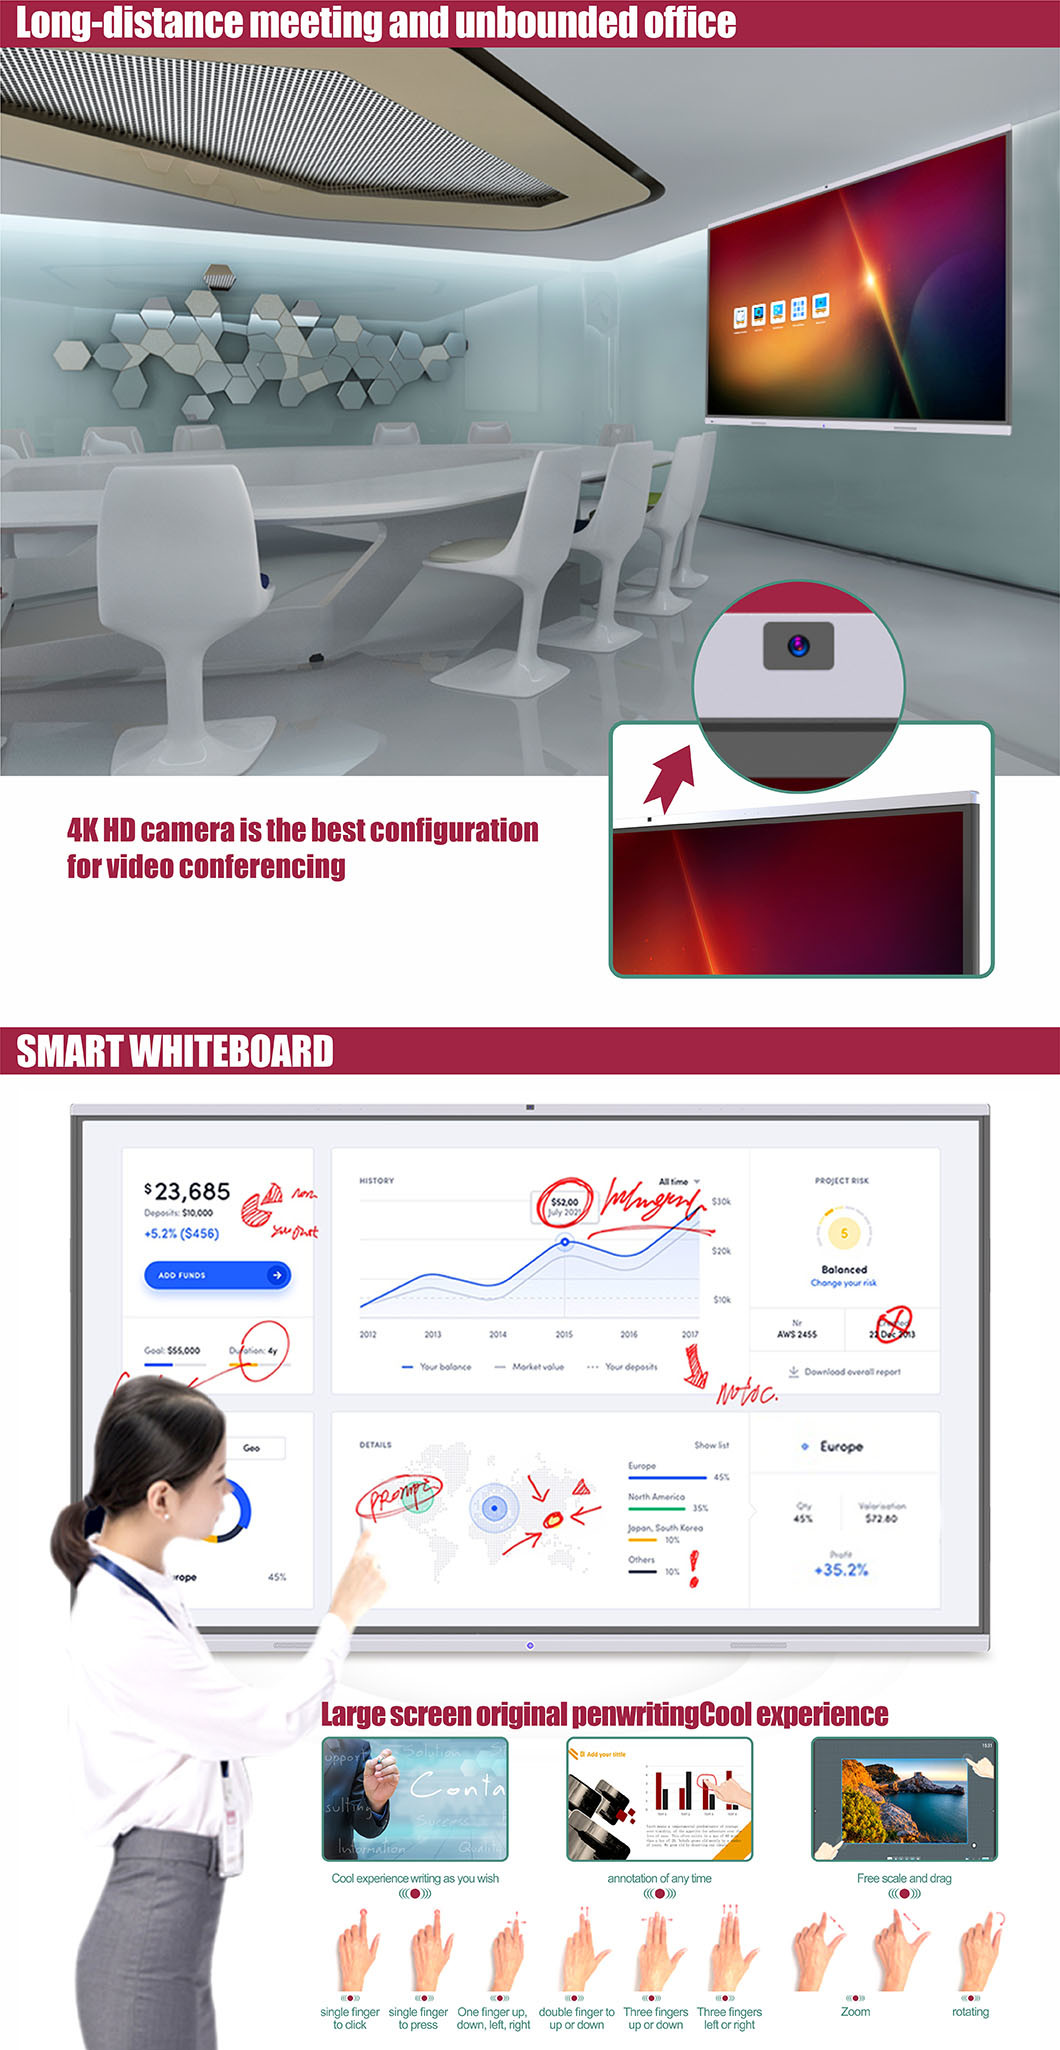 T6 Series 75 Inch LCD Smart Whiteboard with Built-in Camera Microphone IR Digital Interactive Whiteboard with Android and Windows System Interactive Touchscreen